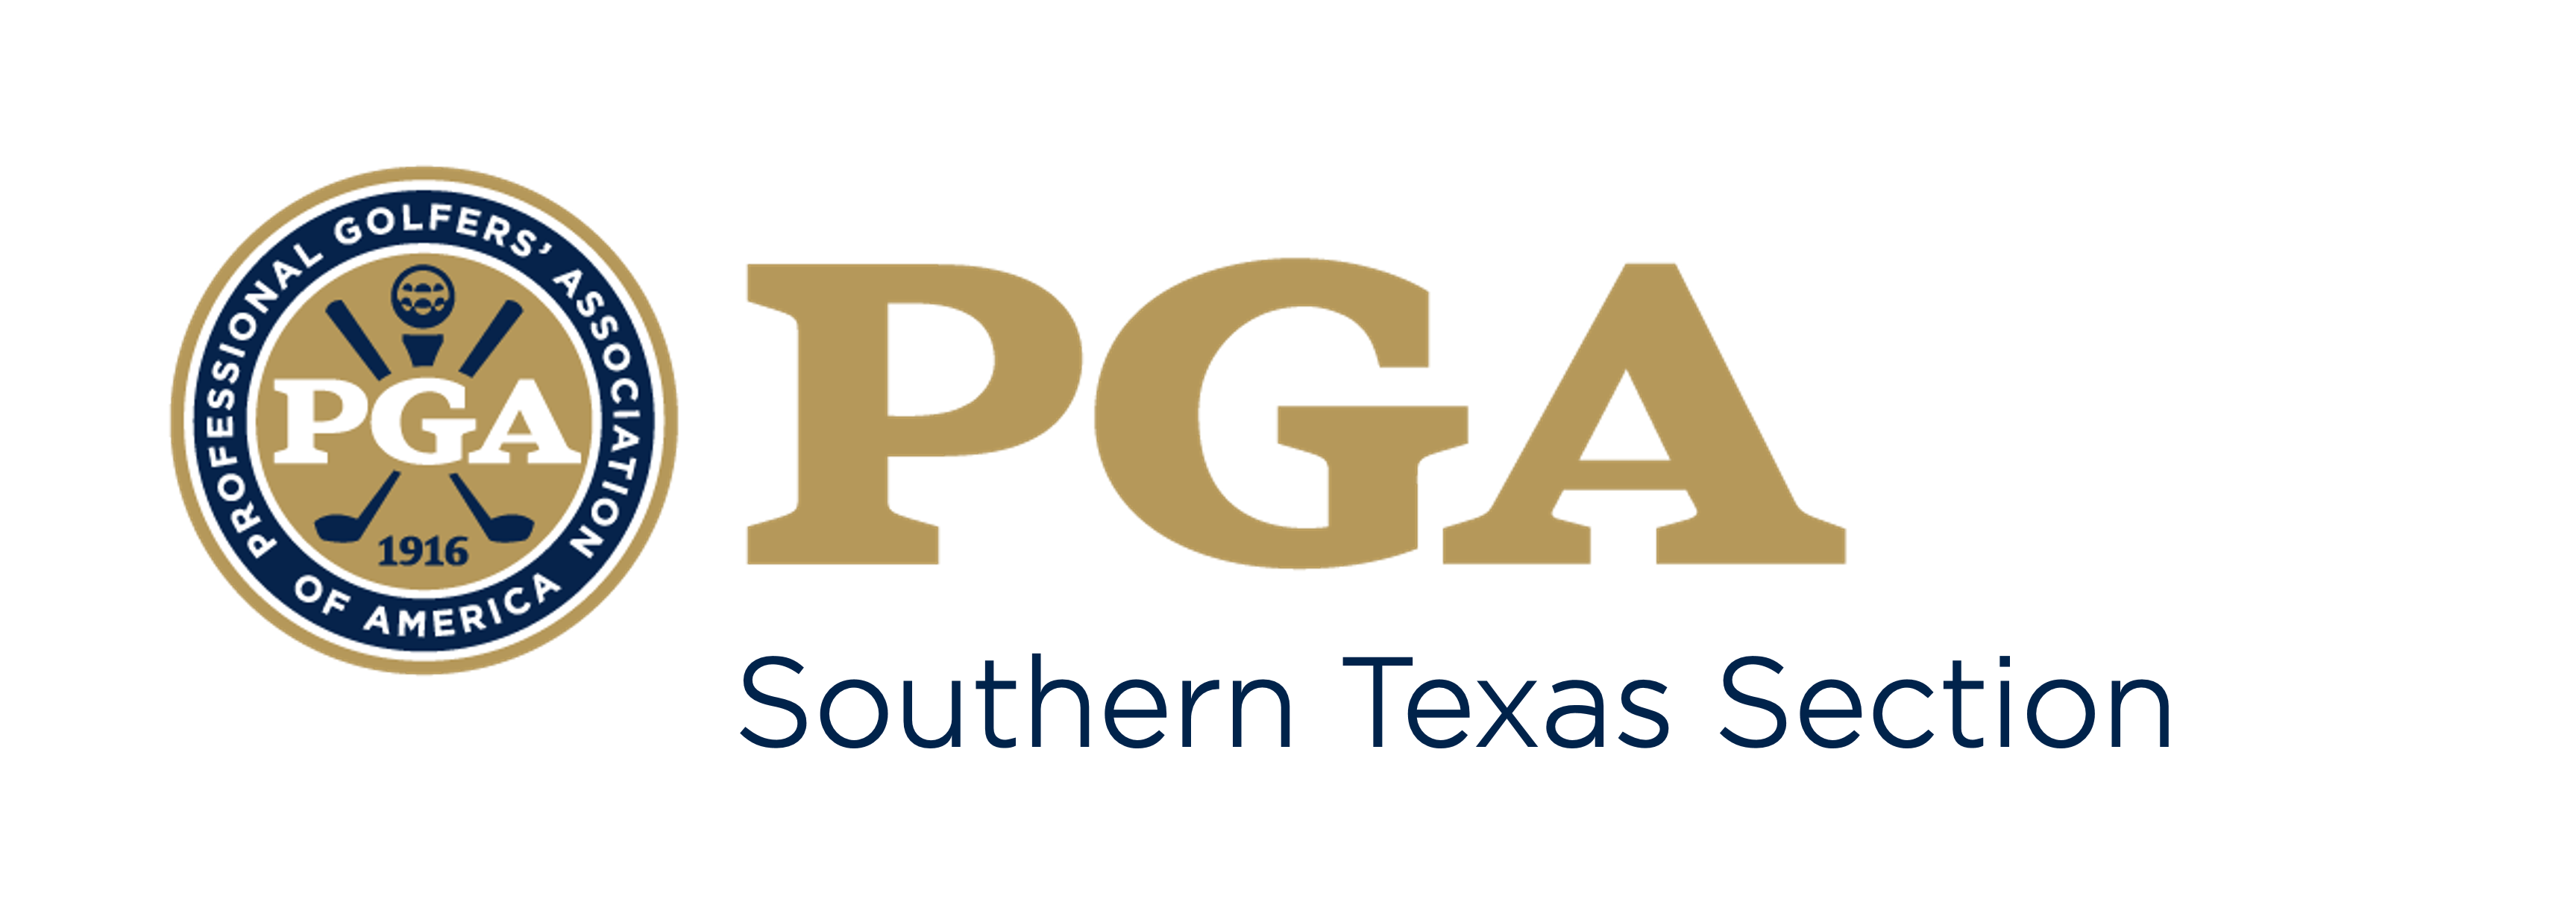 Southern Texas PGA Hole In One Program